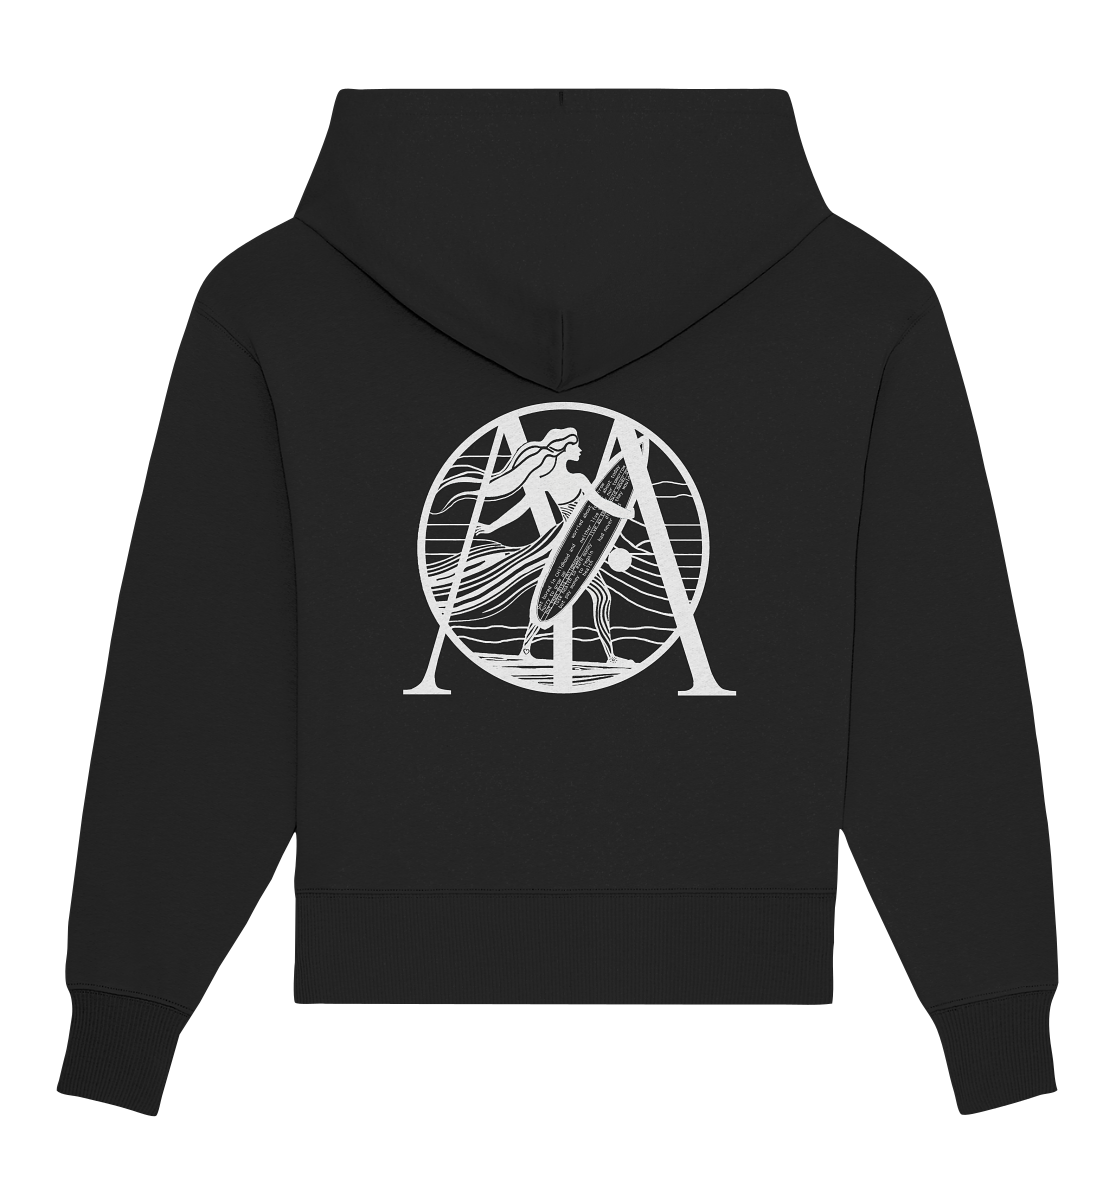 back-organic-oversize-hoodie-272727-1116x-10.png